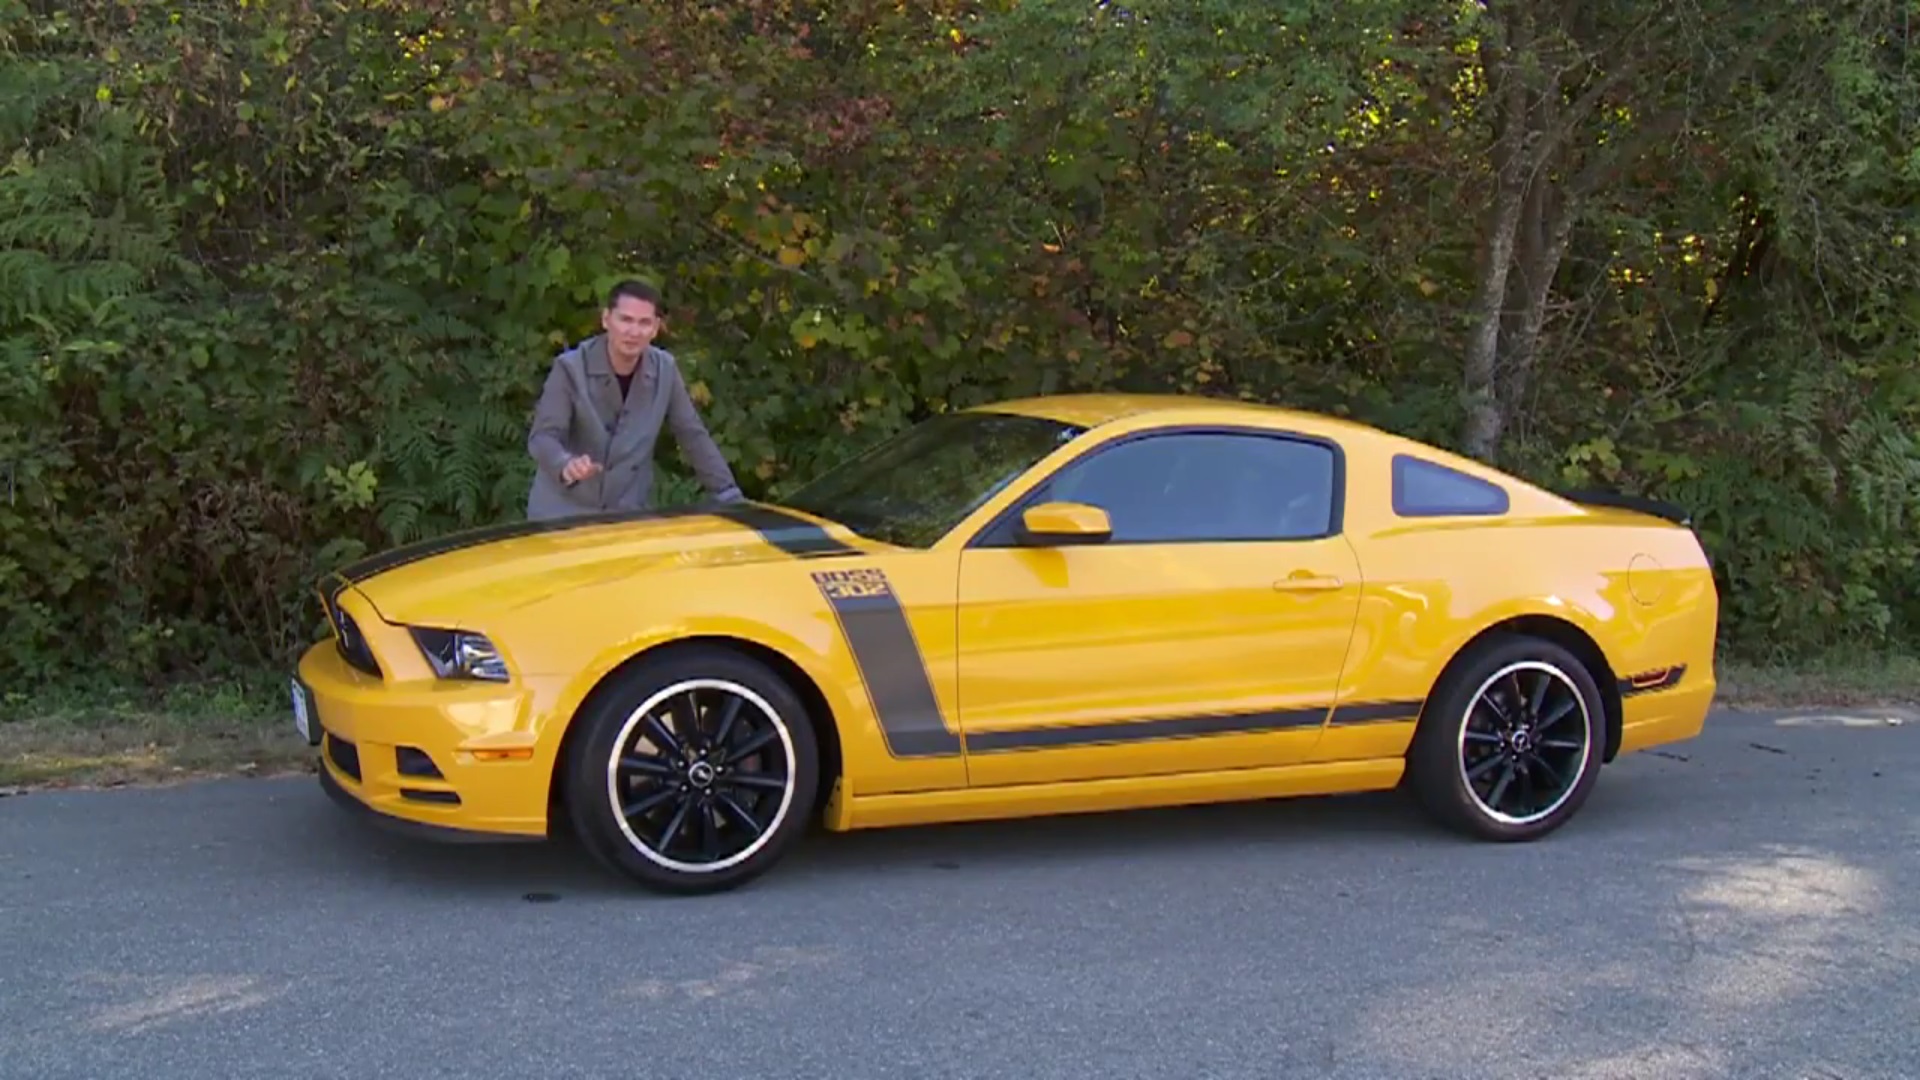 Video: 2013 Ford Mustang Boss 302 Overview